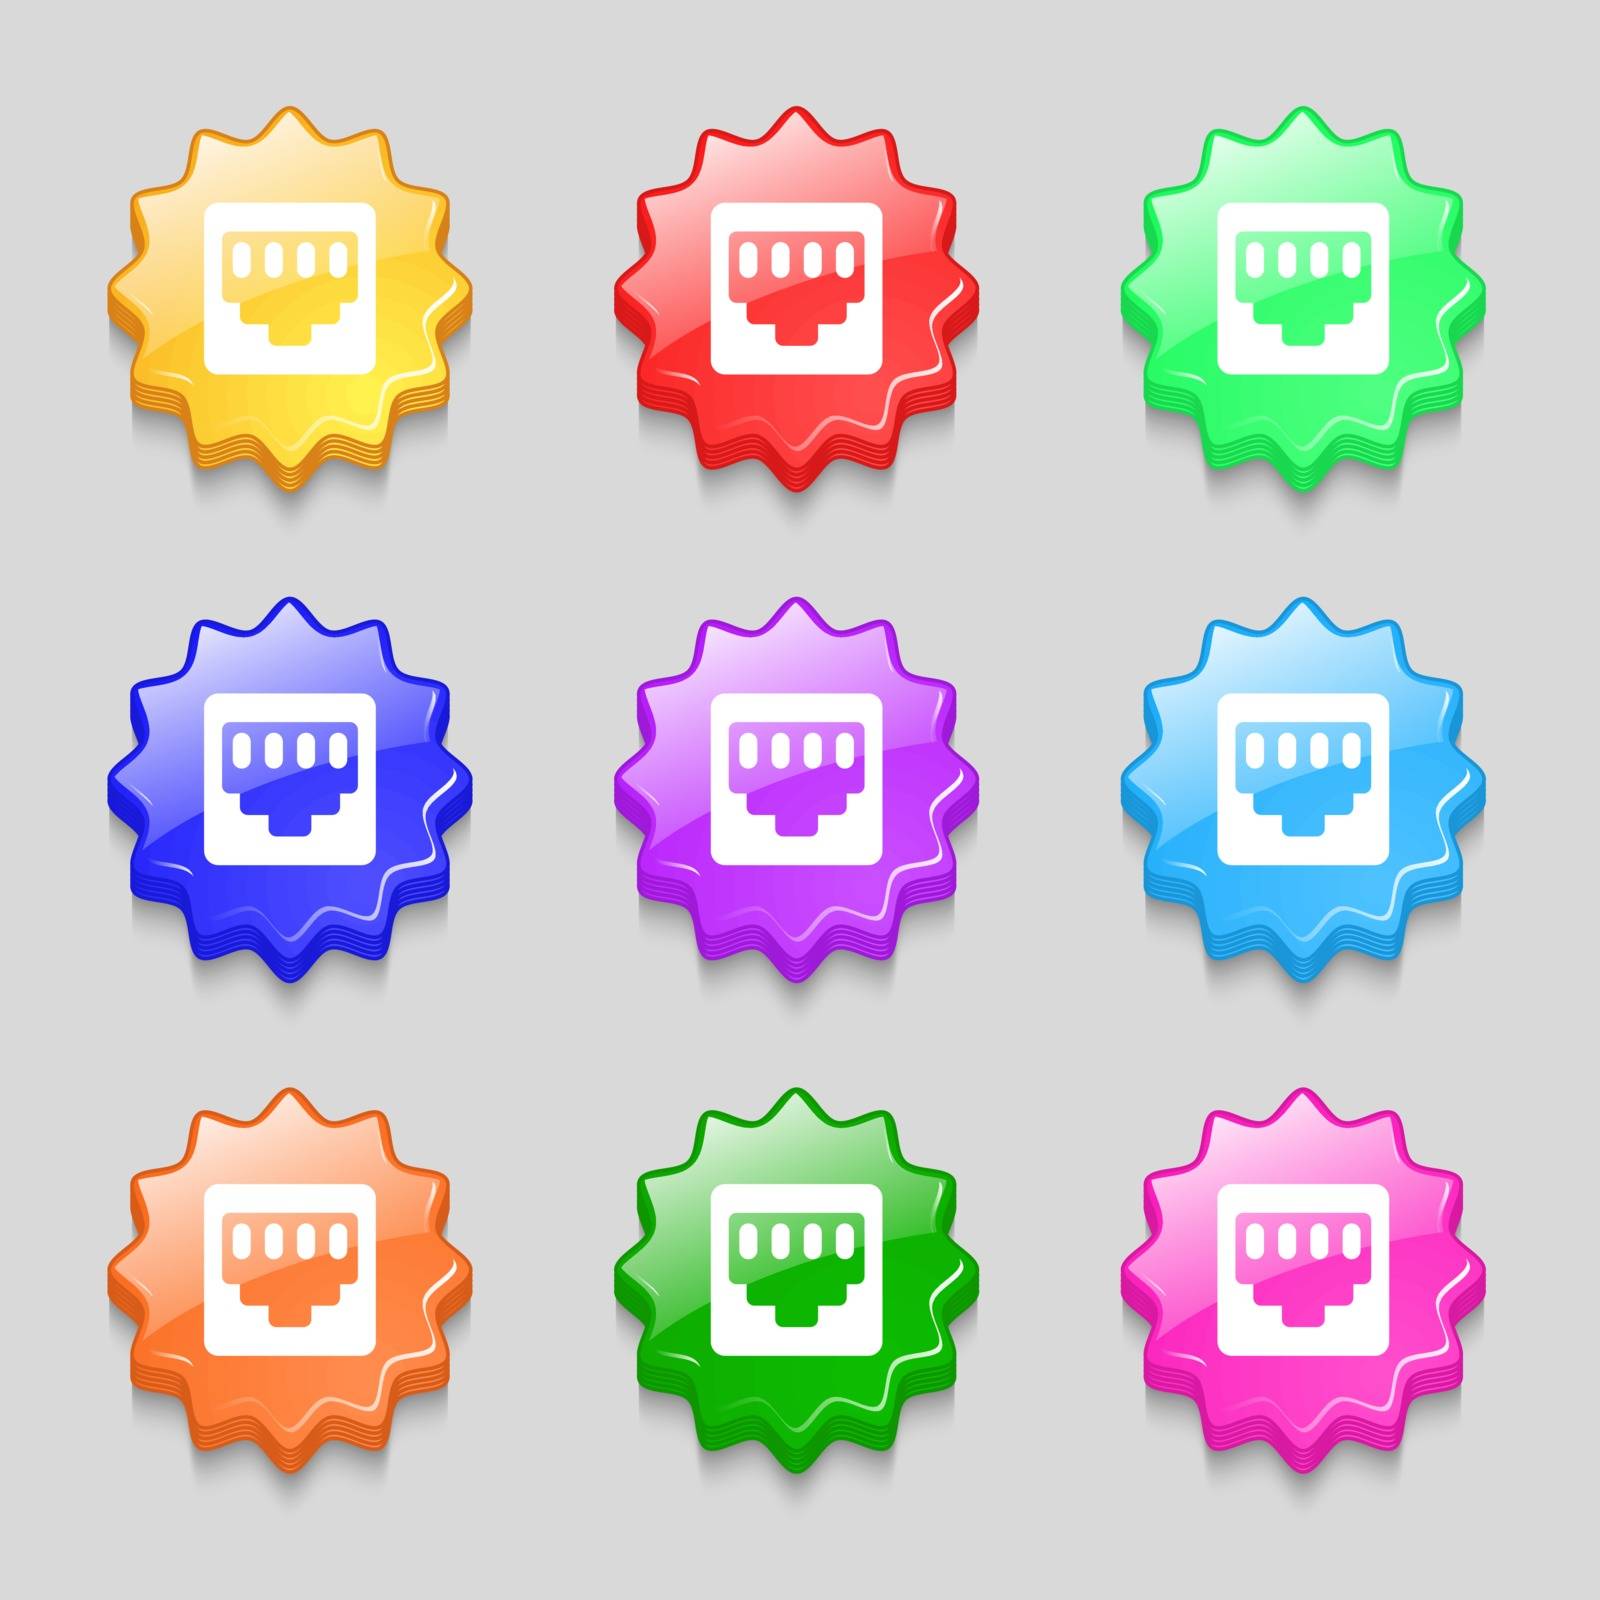 cable rj45, Patch Cord icon sign. symbol on nine wavy colourful buttons. Vector by serhii_lohvyniuk